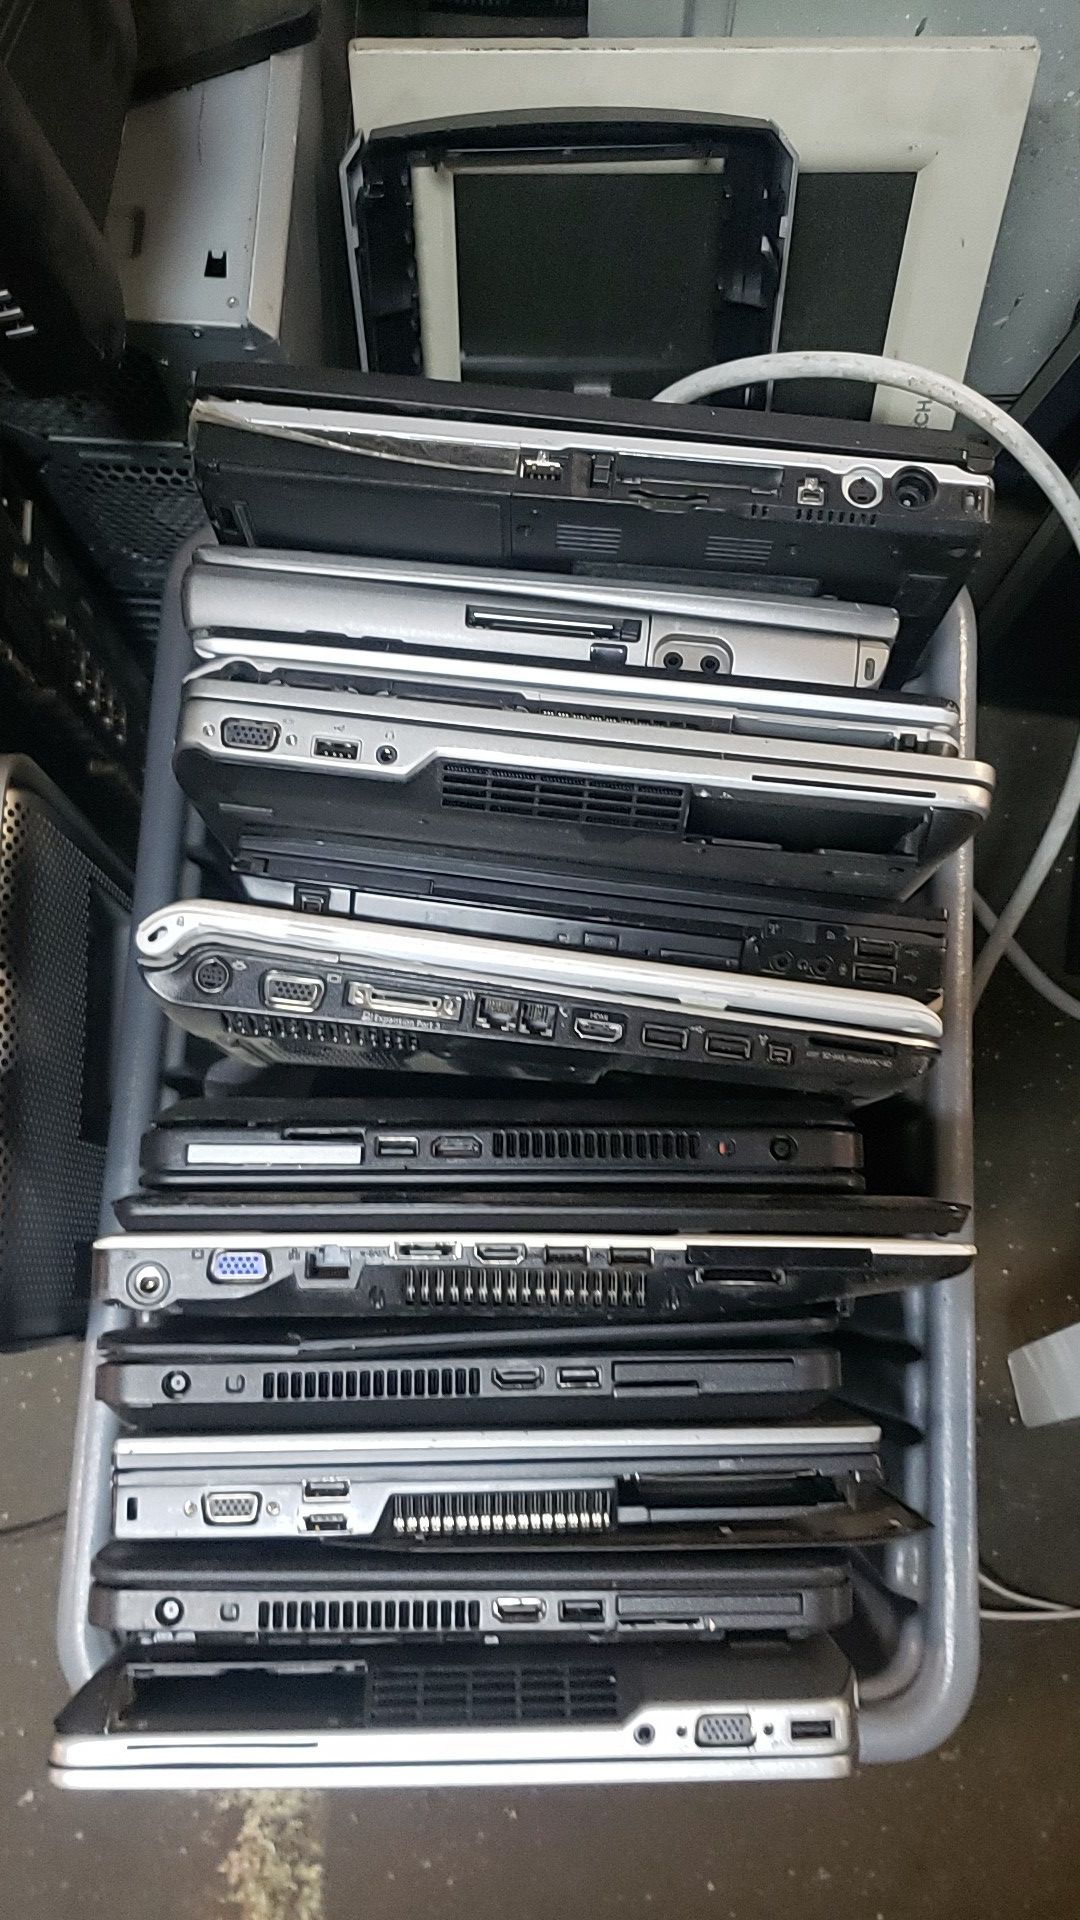 Lot of assorted laptop computers